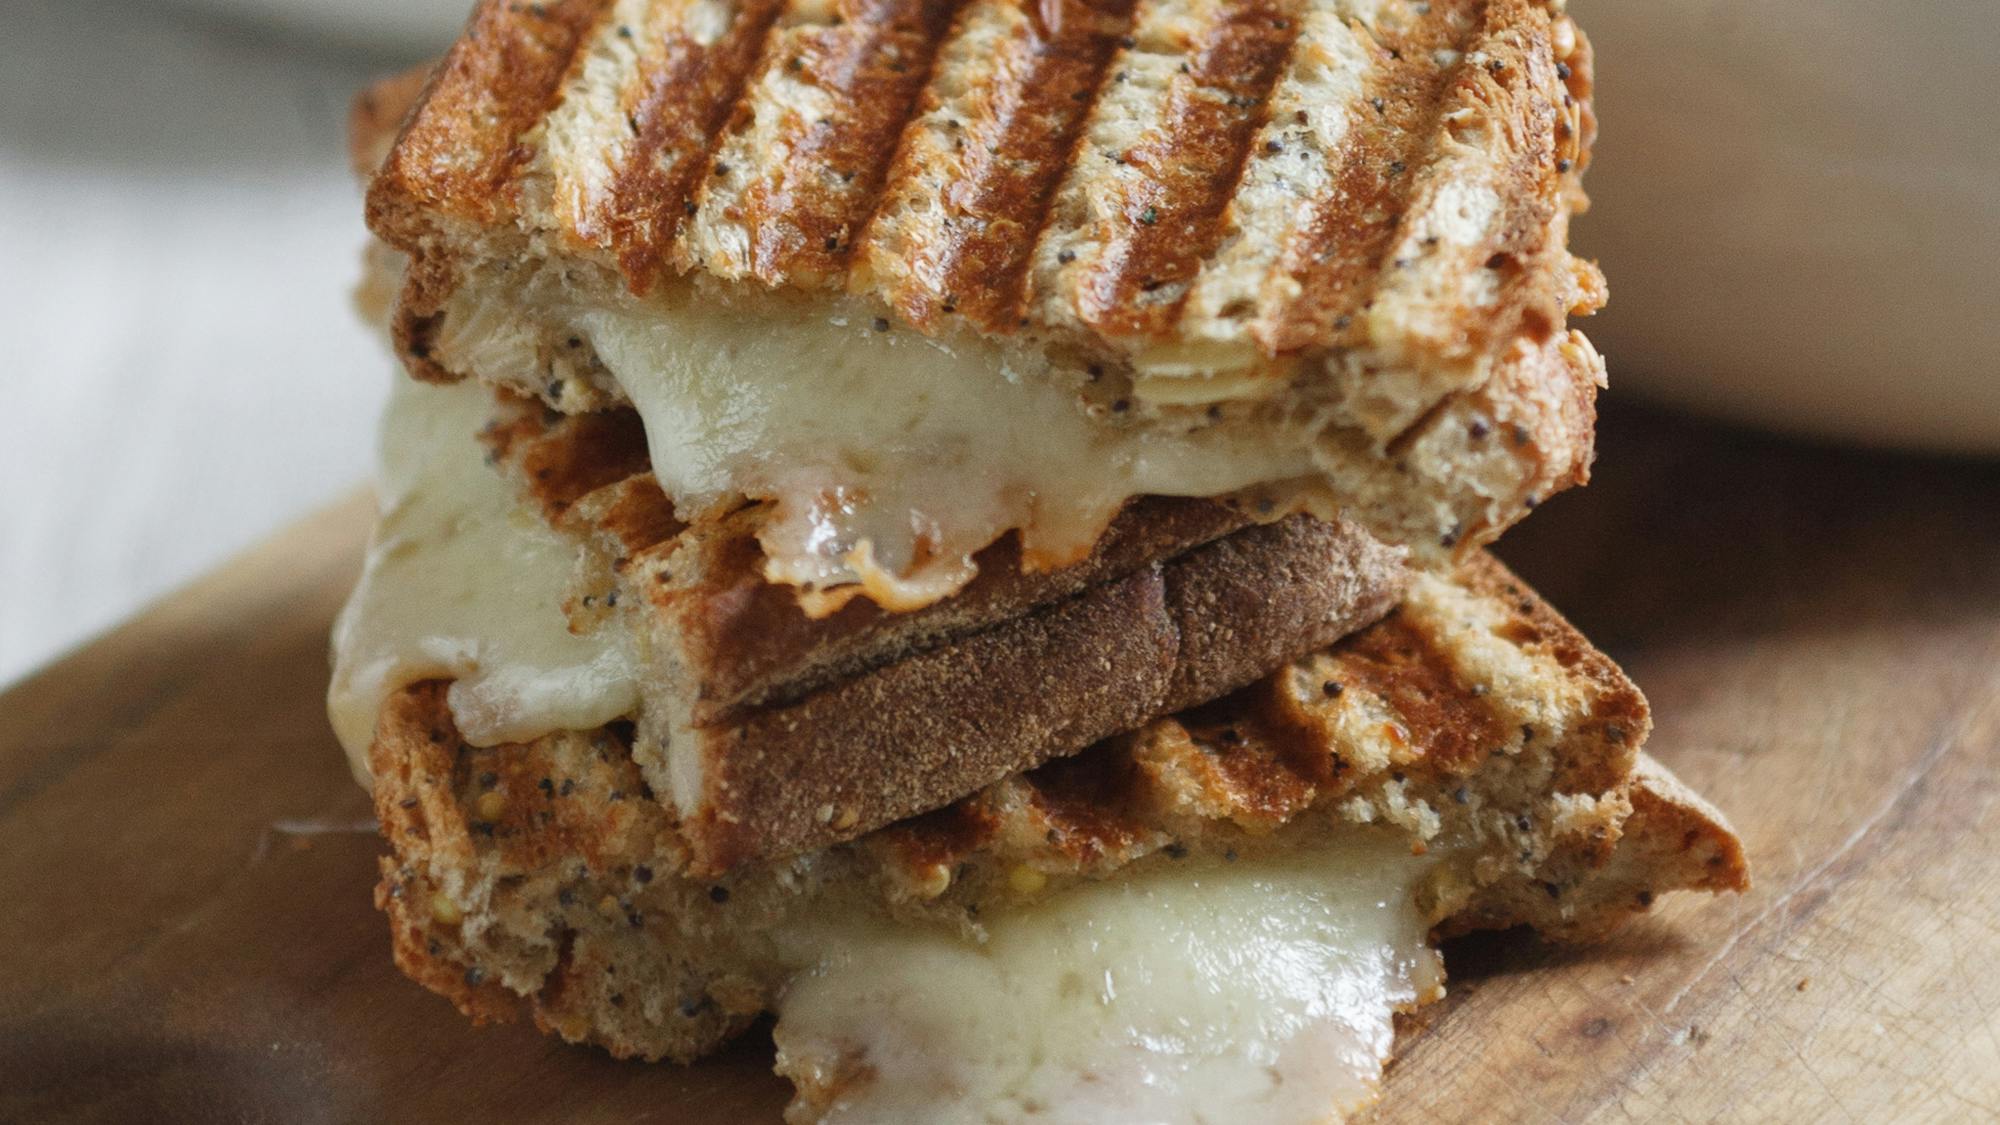 https://images.theyellowtable.com/best-grilled-cheese-sandwiches-recipe-16x9.jpg?w=2000&q=45